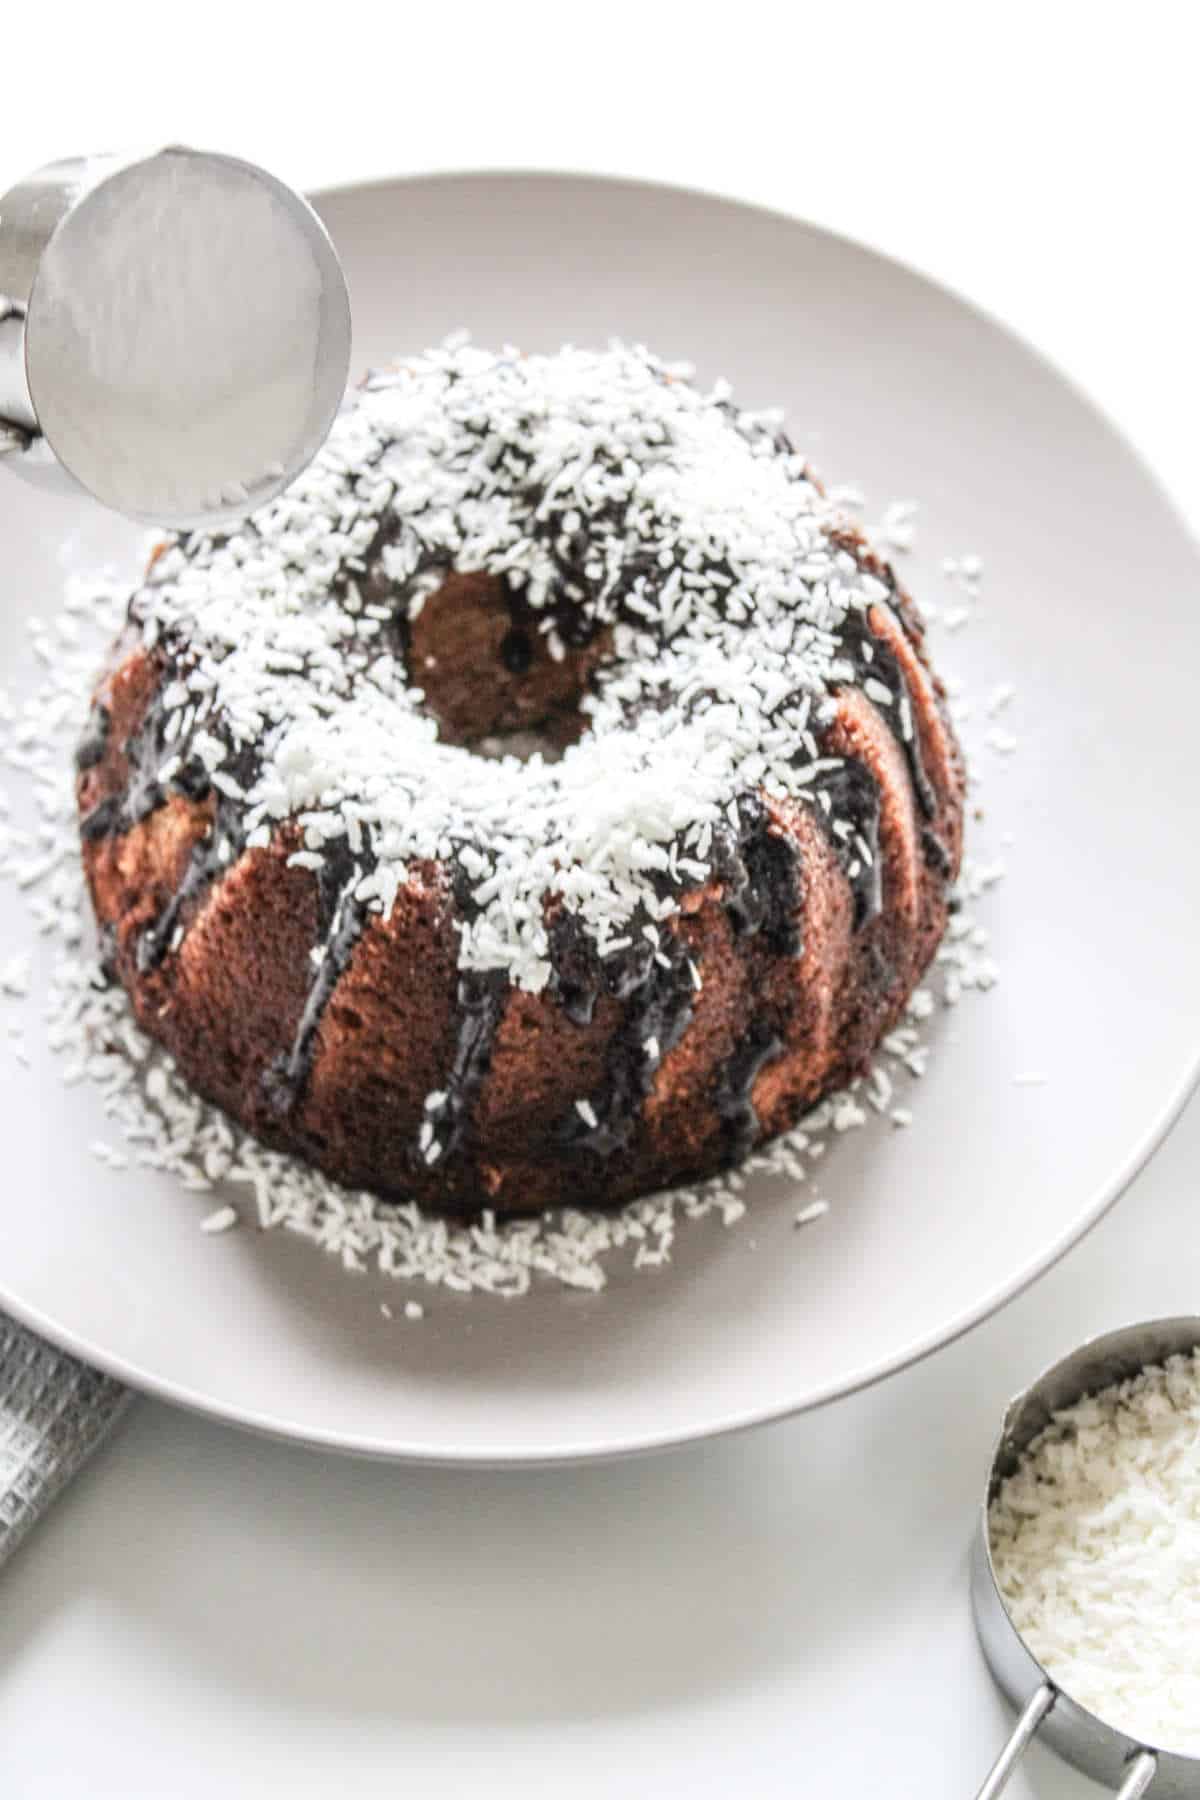 coconut sprinkled on top of a chocolate frosted cake.